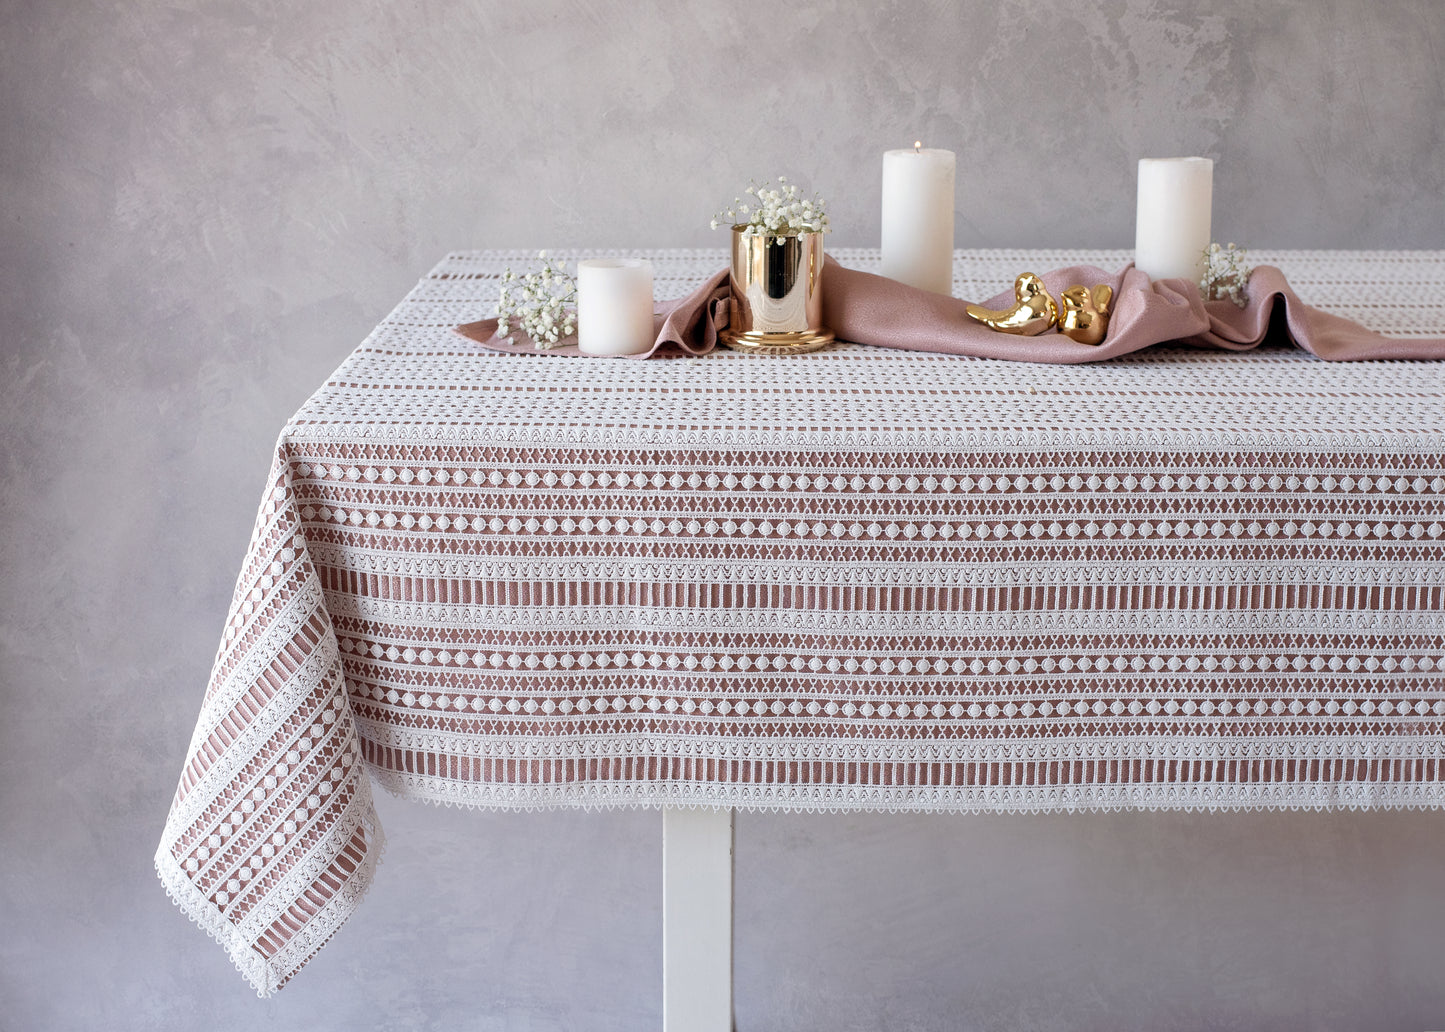 Chameleon Lace Tablecloth Lined